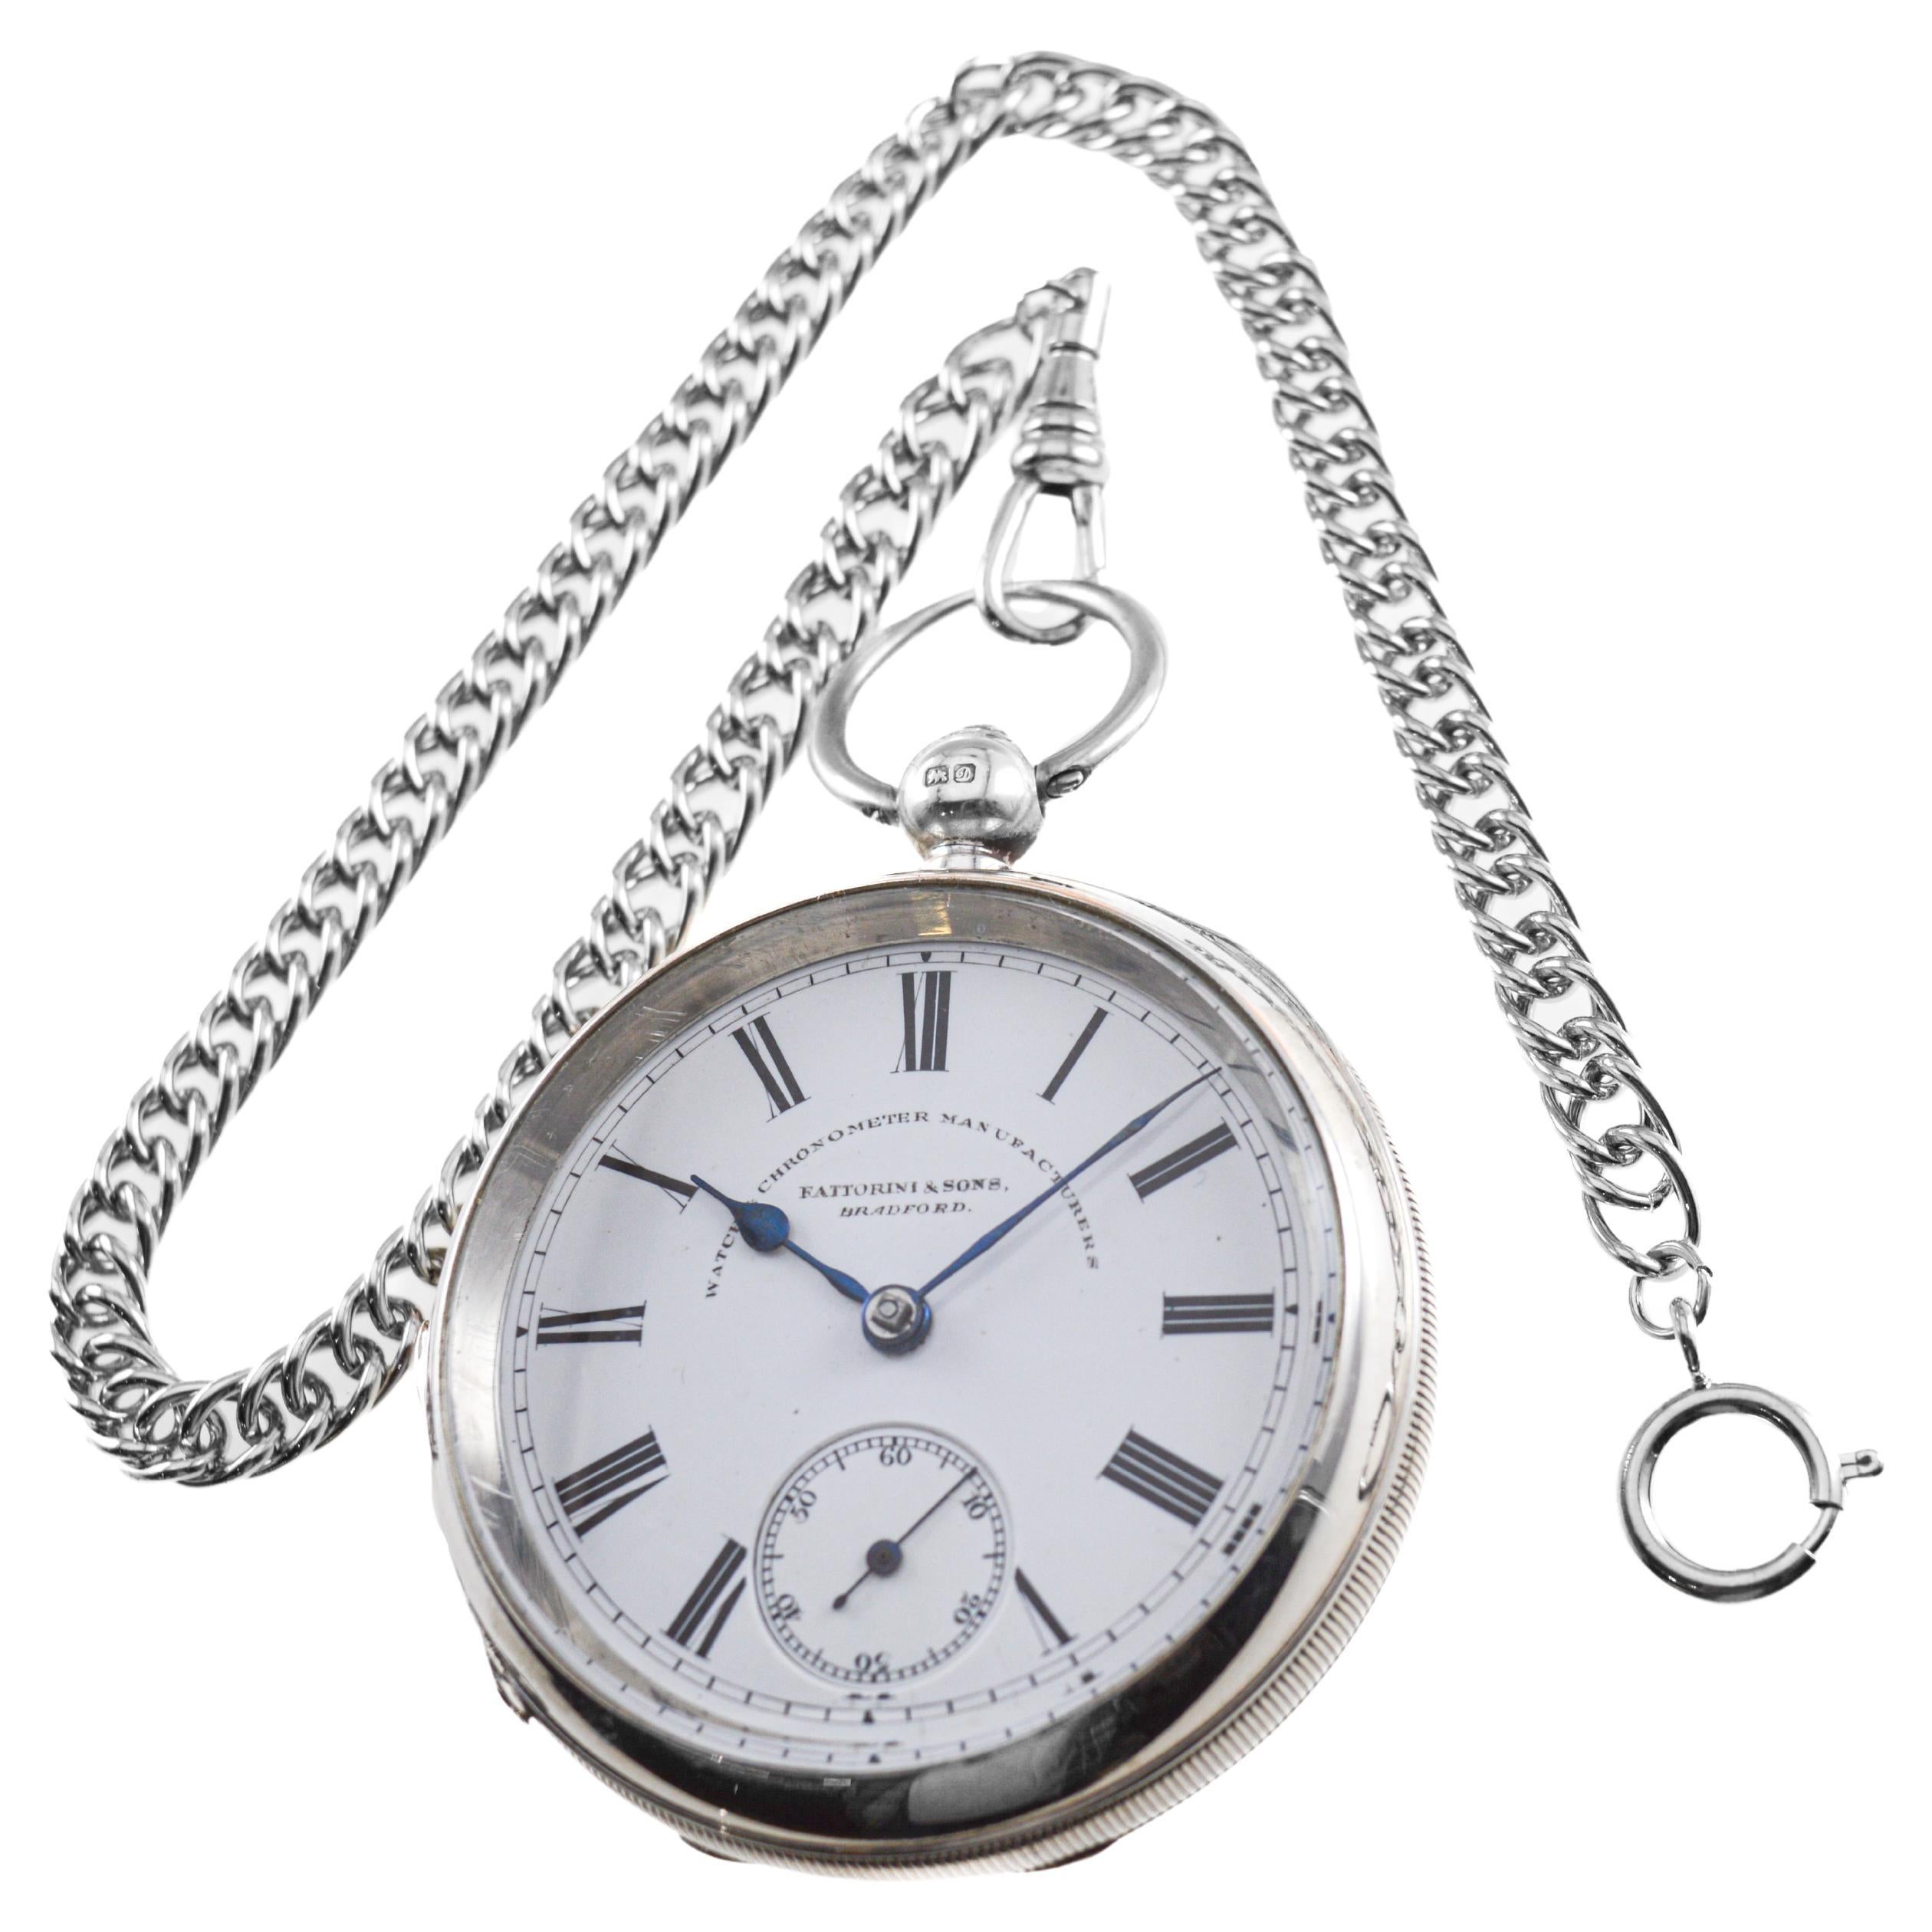 FACTORY / HOUSE: Fattorini & Sons
STYLE / REFERENCE: Full Size Keywind
METAL / MATERIAL: Sterling Silver
CIRCA / YEAR: 1880's
DIMENSIONS / SIZE: Diameter 55mm
MOVEMENT / CALIBER: Key Winding / 7 Jewels 
DIAL / HANDS: Kiln Fired Enamel with Roman